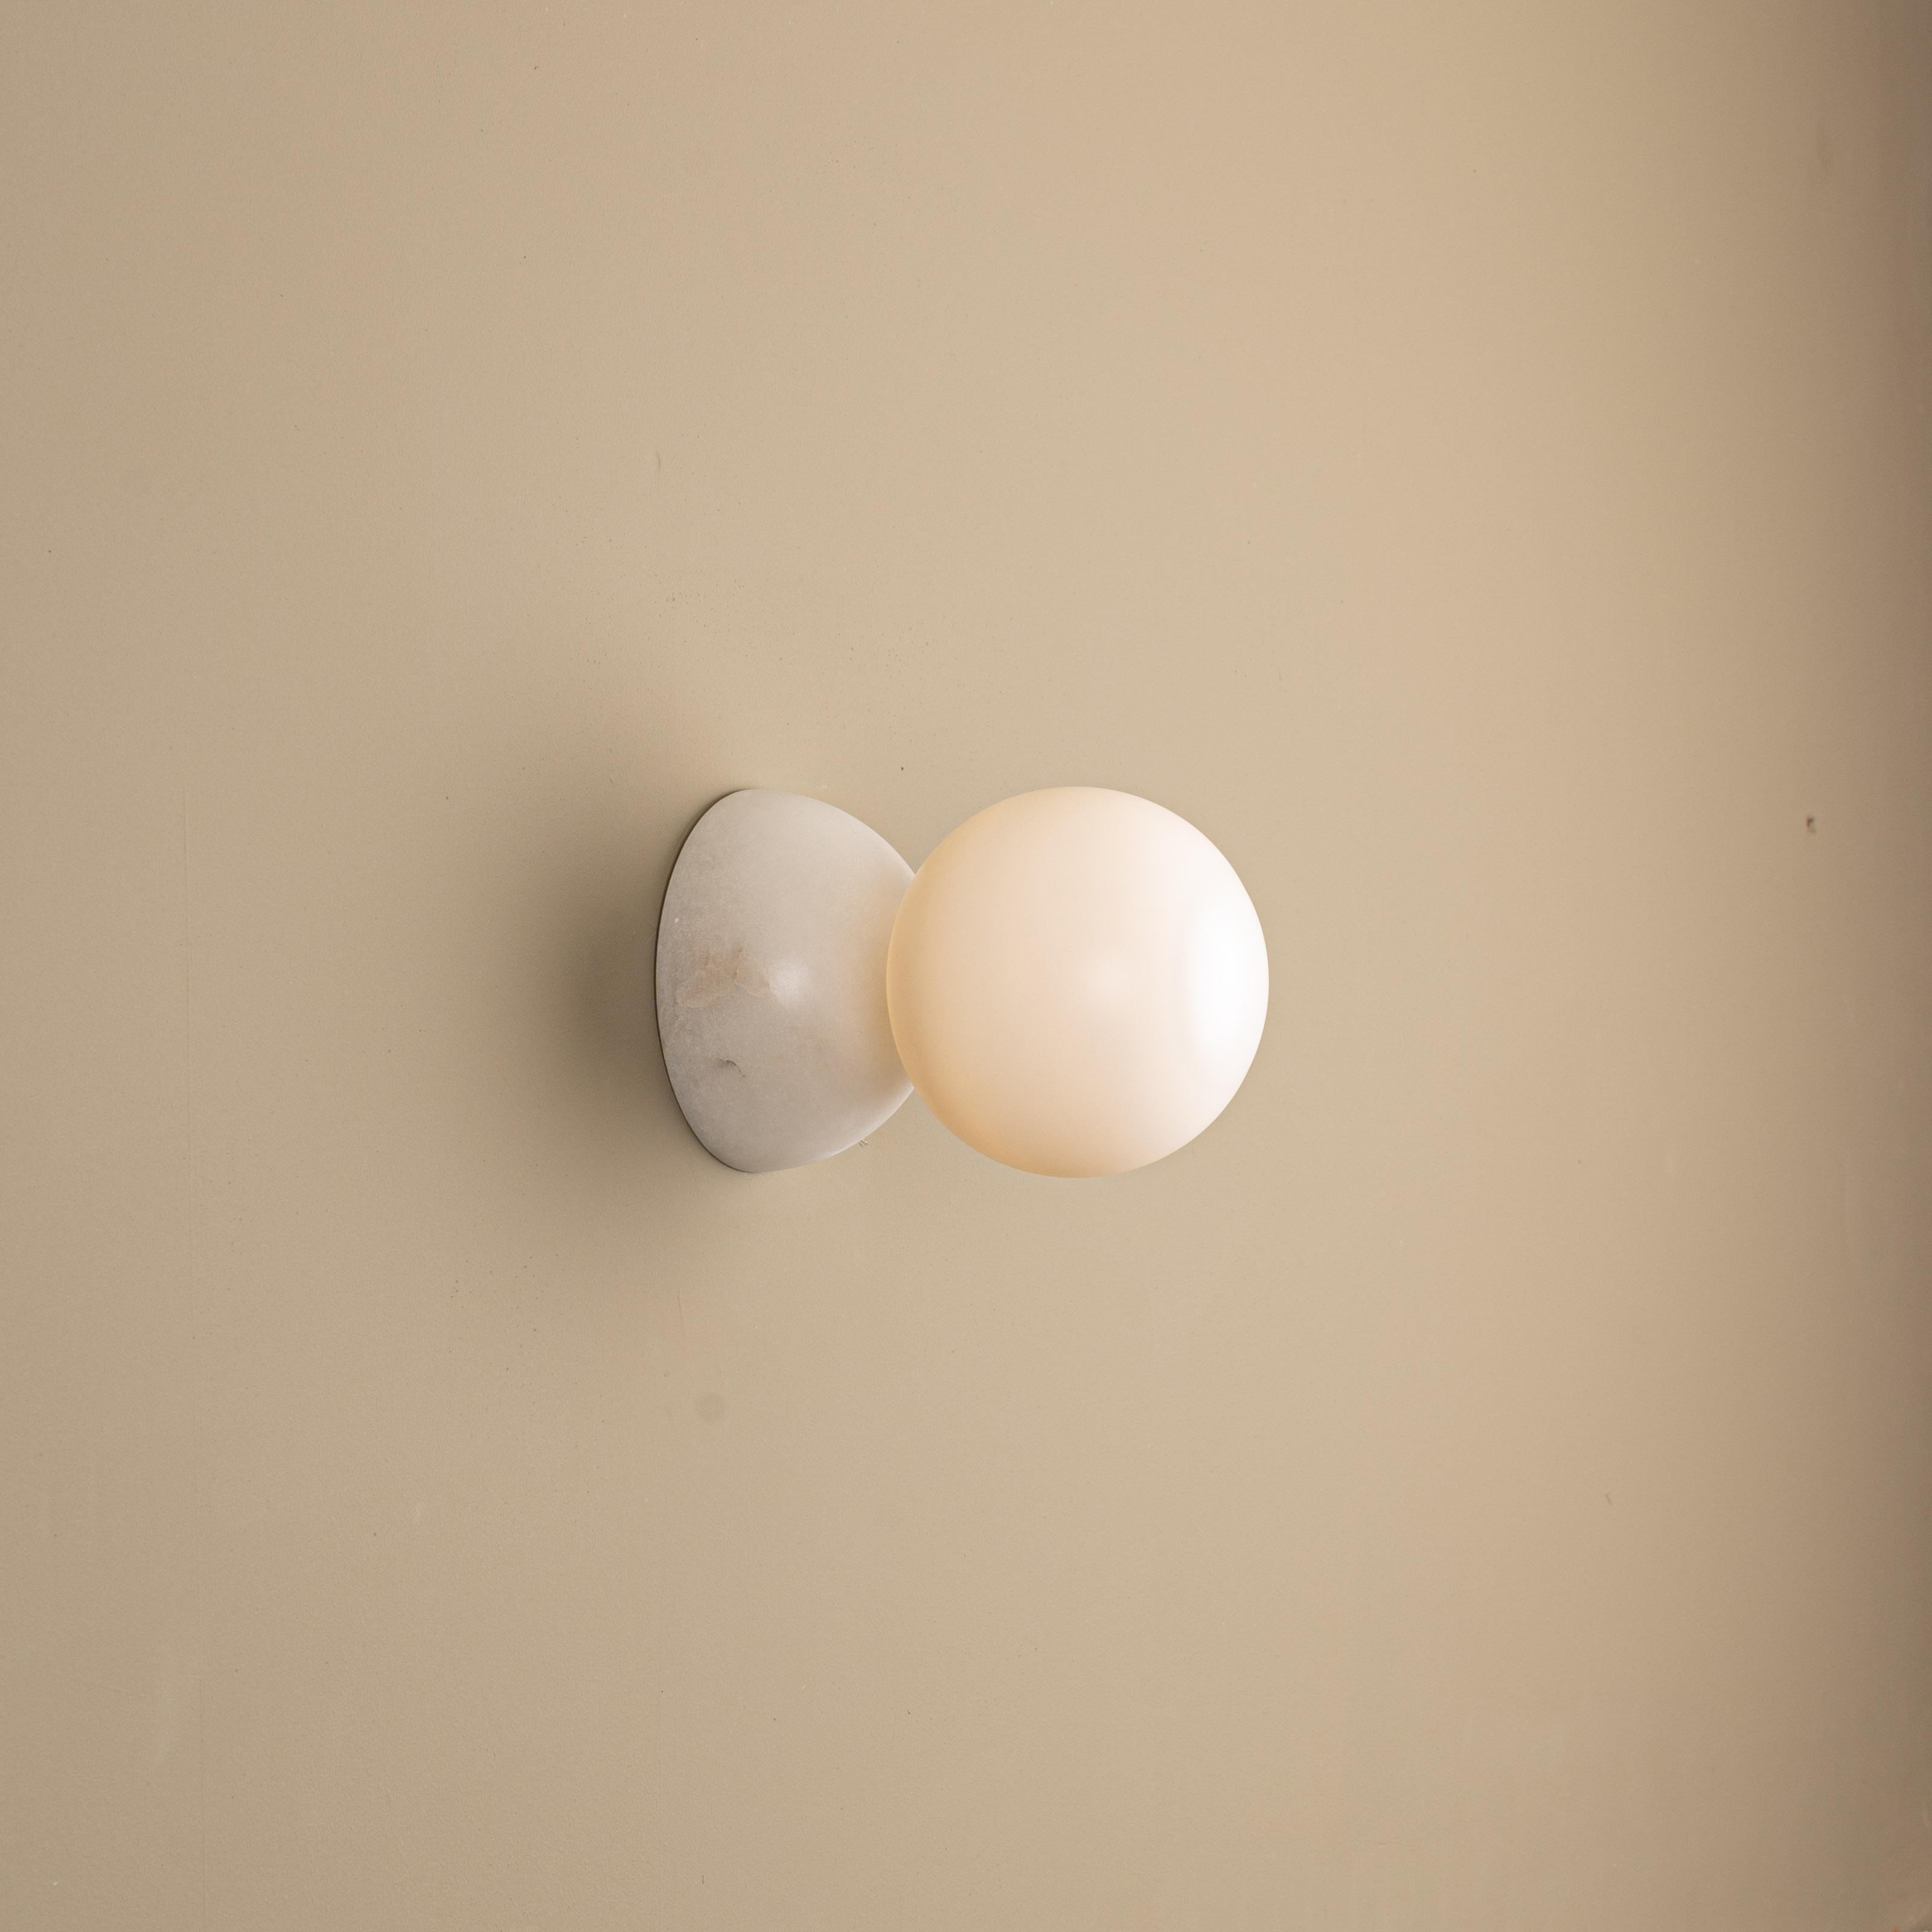 Eklipso White Alabaster Wall Sconce by Simone & Marcel
Dimensions: D 19,5 x W 14 x H 14 cm.
Materials: White alabaster and glass.

Available in different marble, brass, steel and alabaster options and finishes. Custom options available on request.